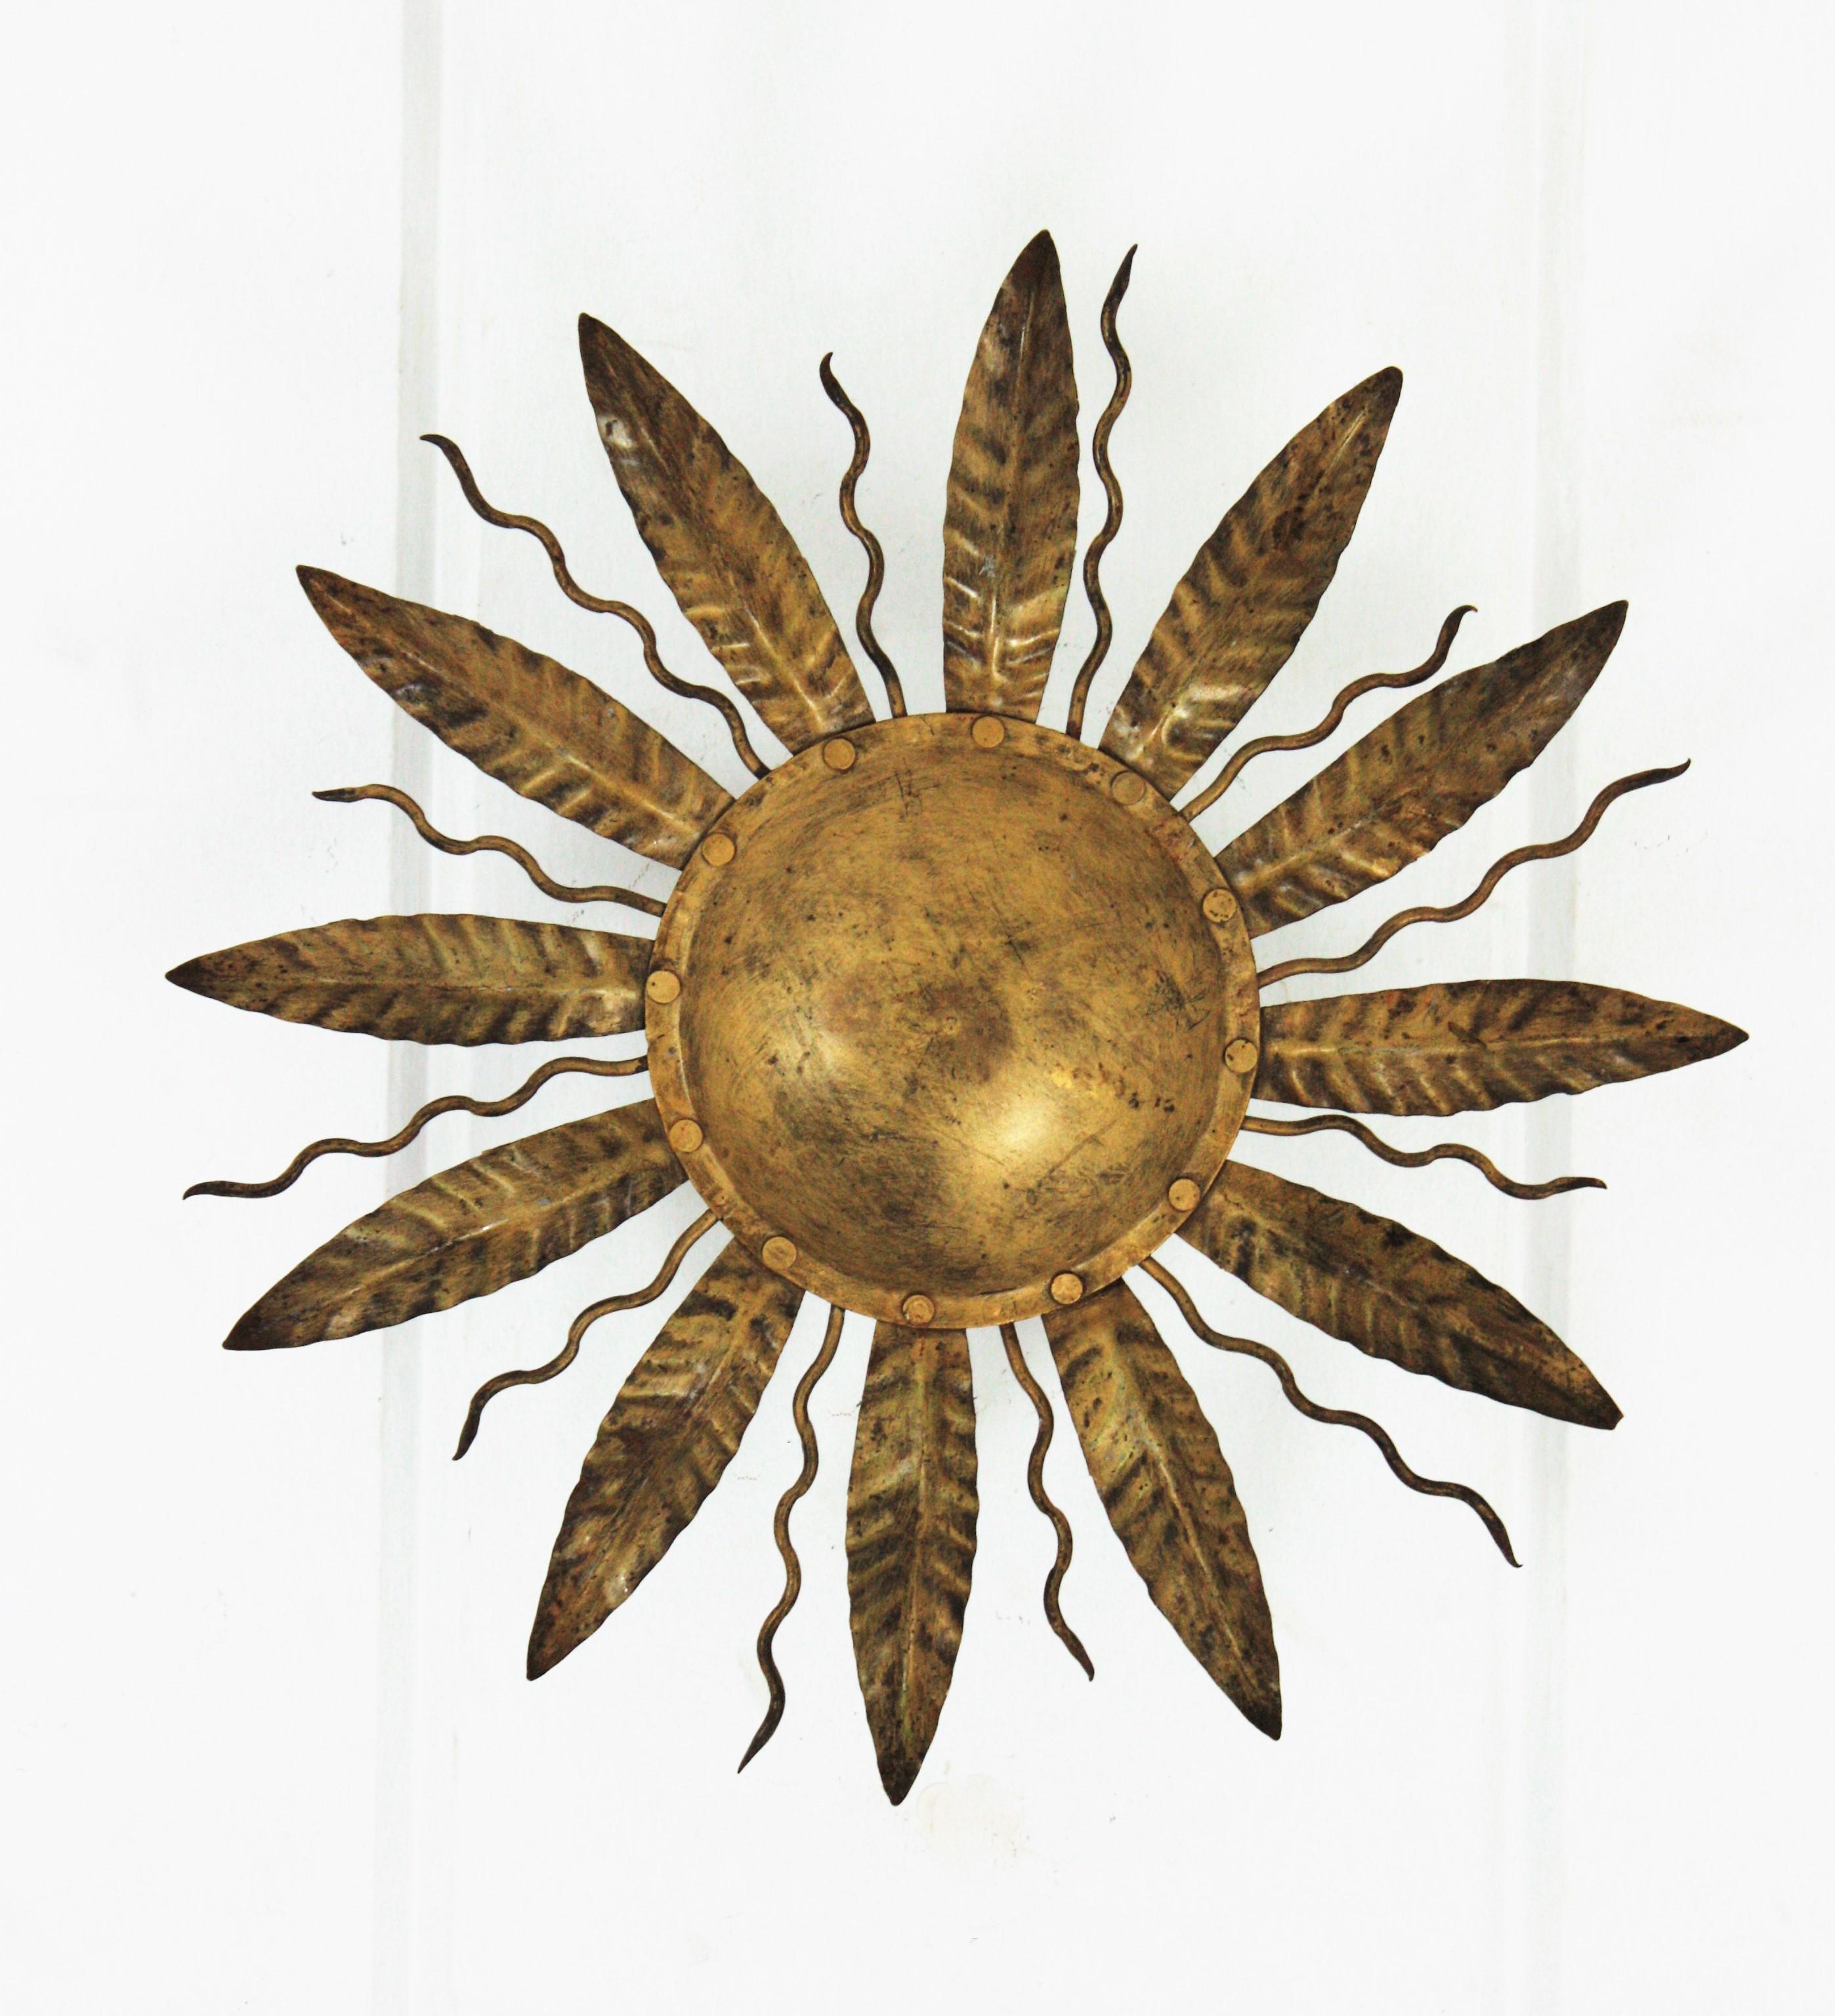 Lovely gilt metal leafed sunburst flushmount. Spain, 1950s-1960s.
This ceiling flushmount features an iron structure with a central round panel surrounded by alternating leaves and curly rays.
It has a nice aged patina.
Two E14 bulbs at the back